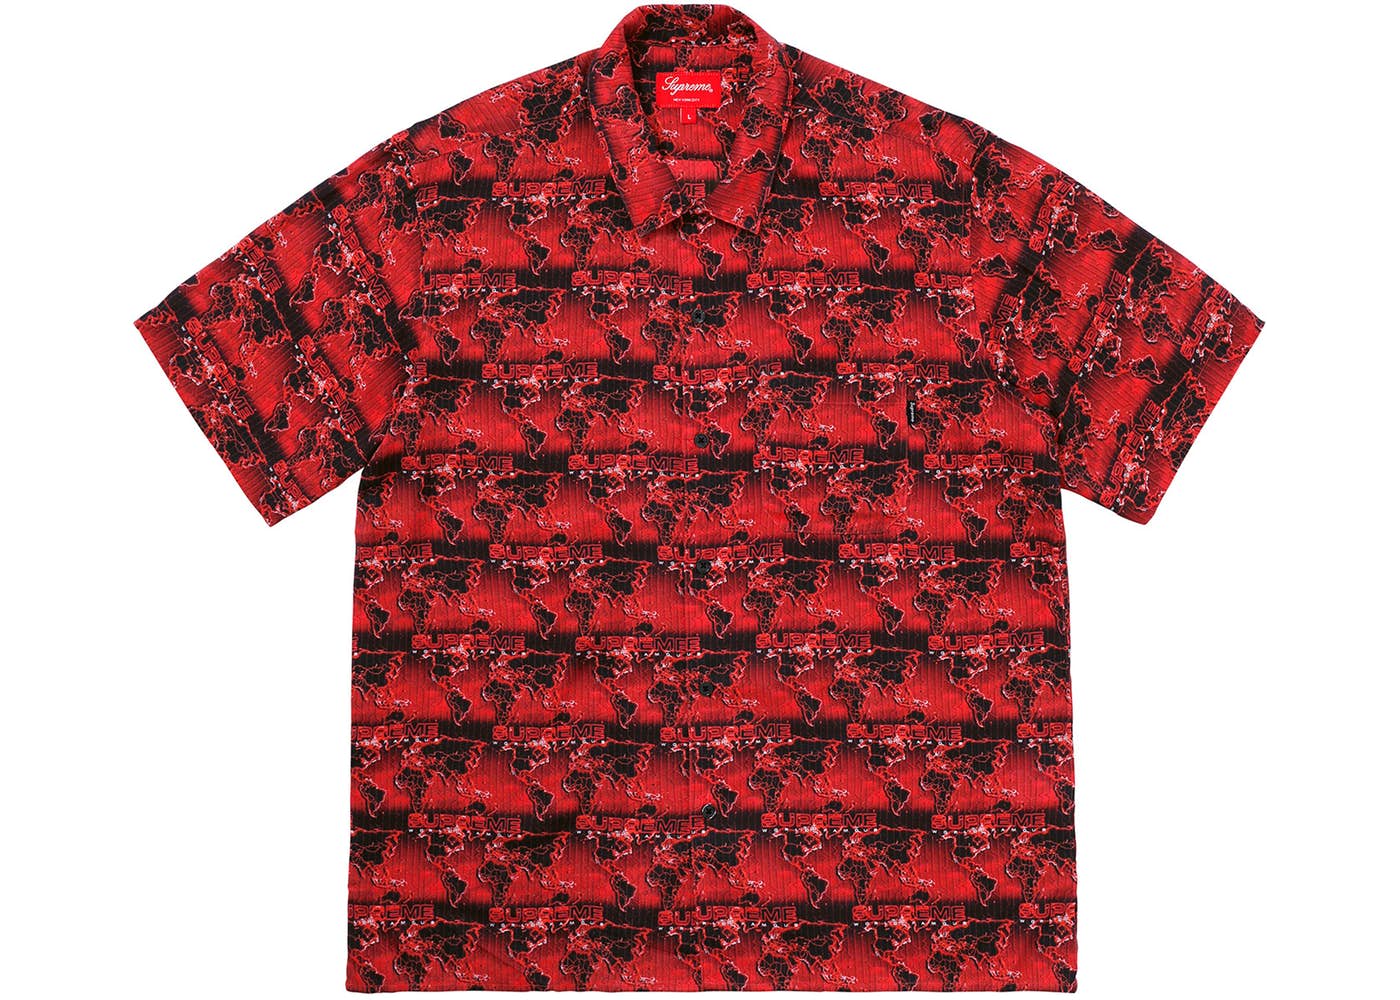 https://images-wp.stockx.com/news/wp-content/uploads/2018/04/Supreme-World-Famous-Rayon-Shirt-Red.jpg